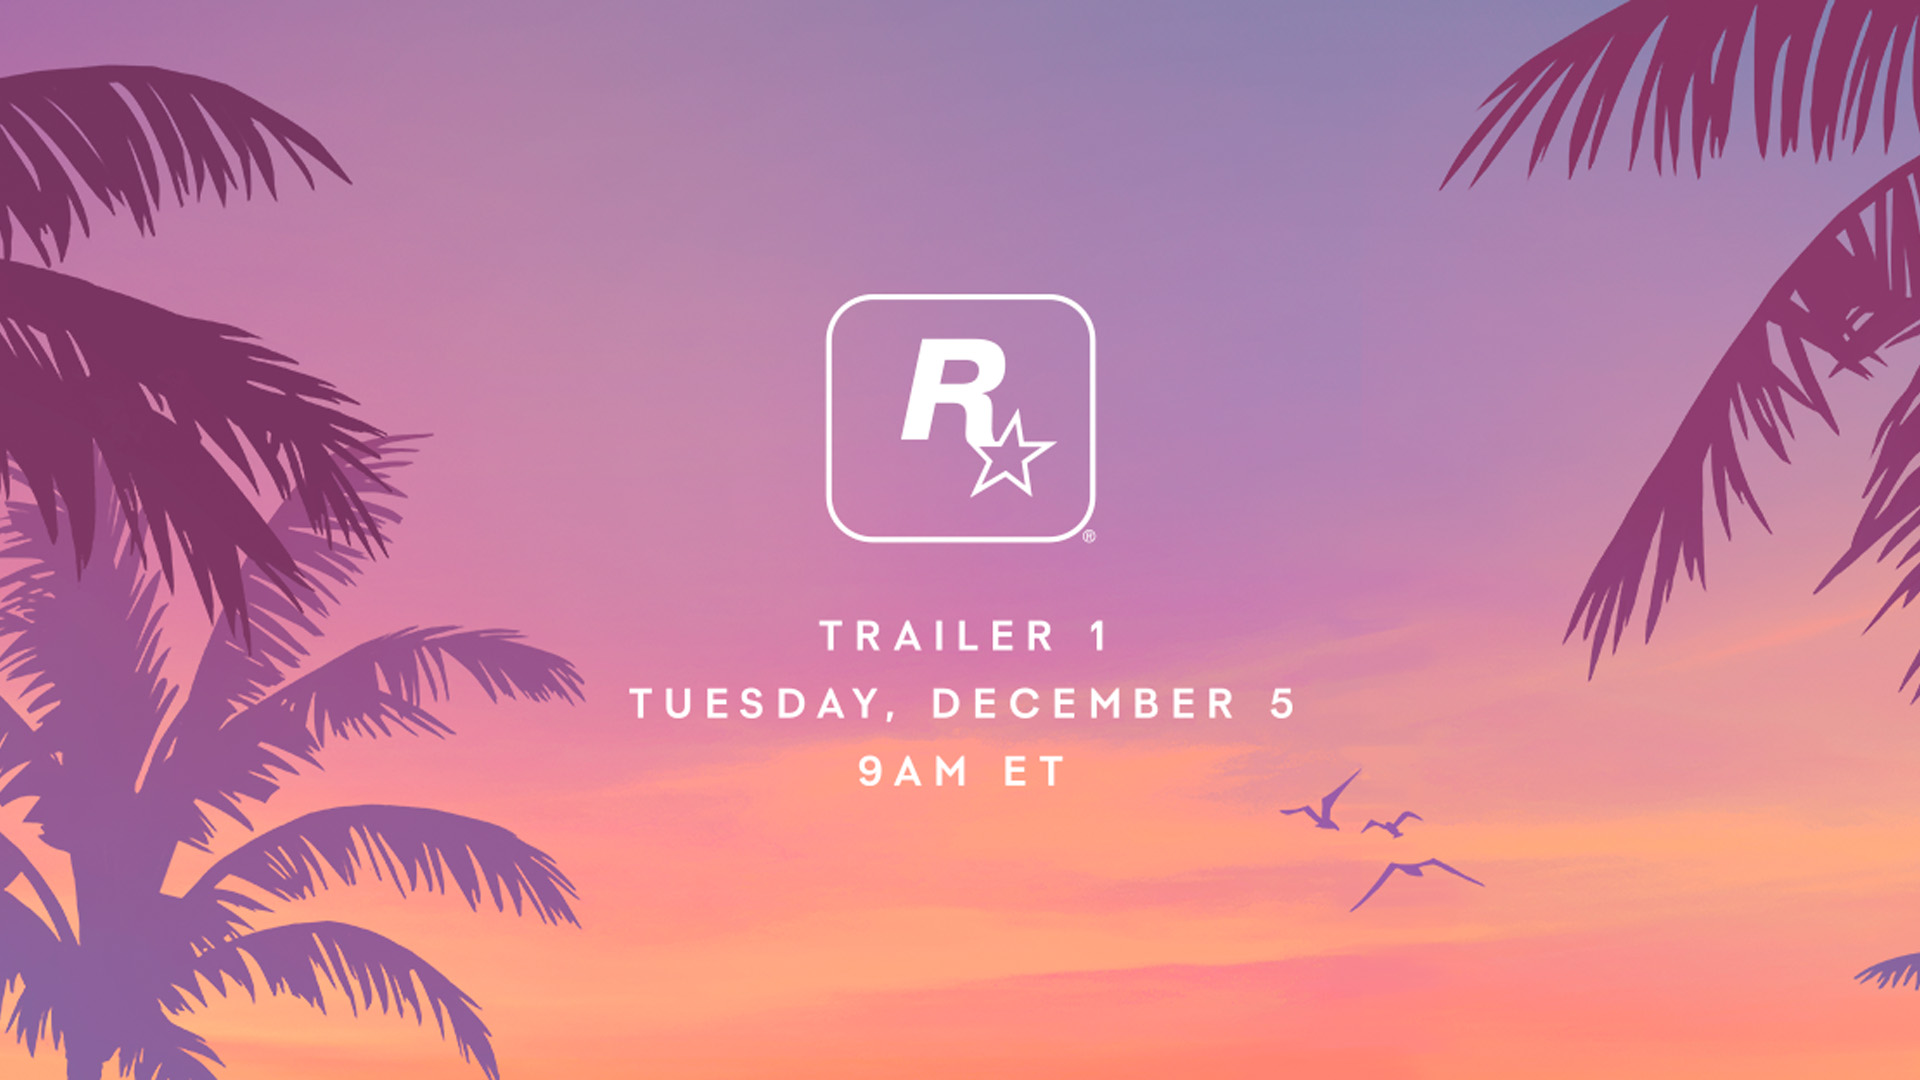 GTA 6 Trailer May Come Out on Tuesday 5th December, Rockstar Games Suggest